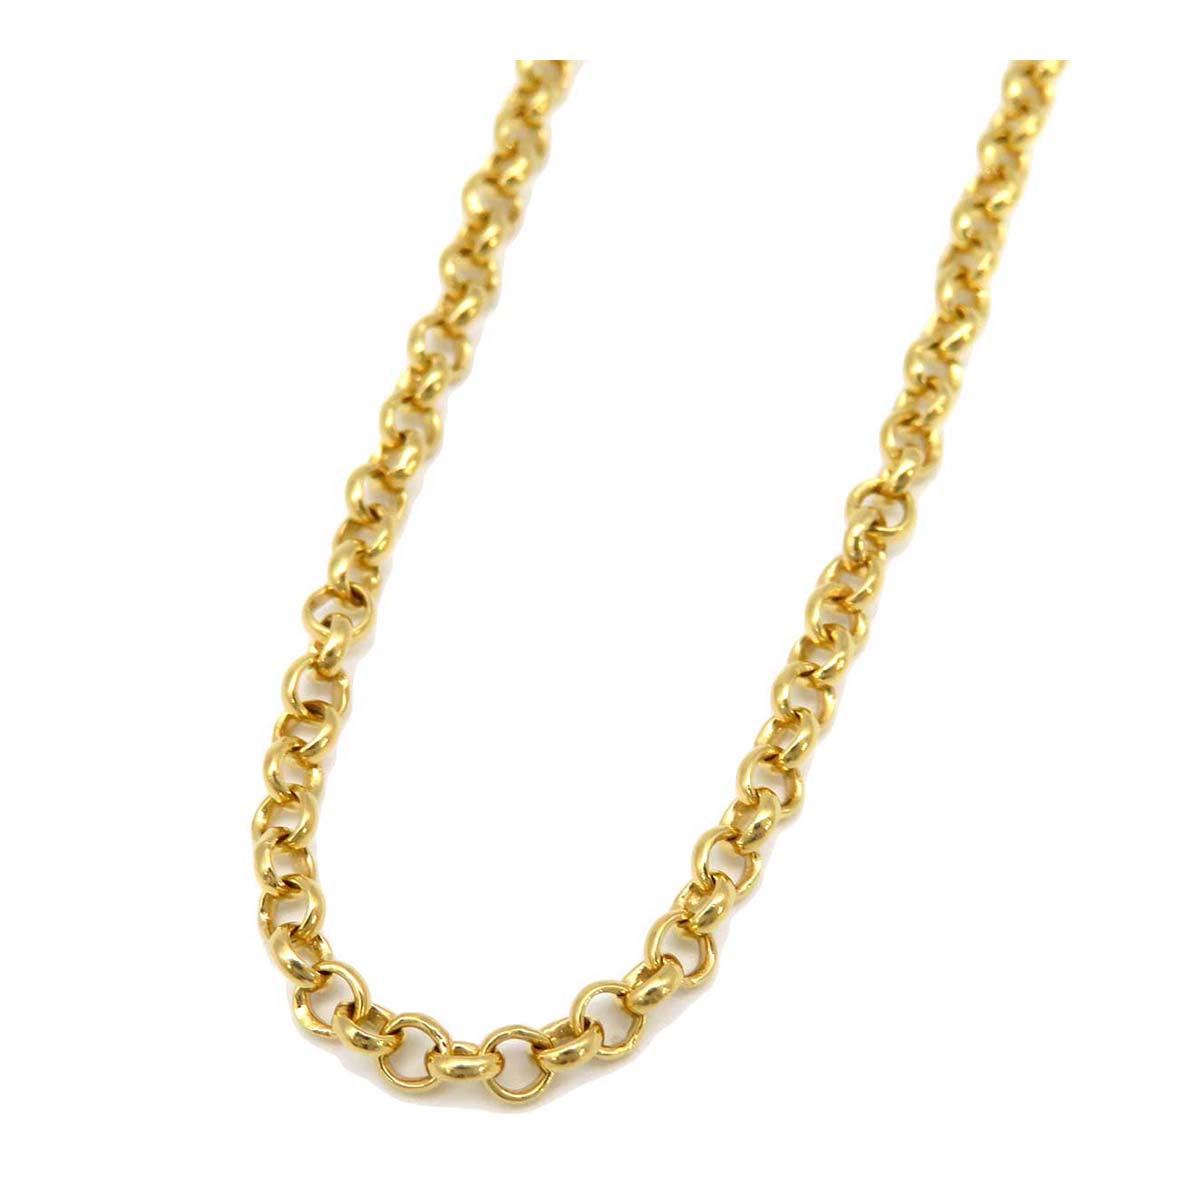 22K Chain Link Necklace